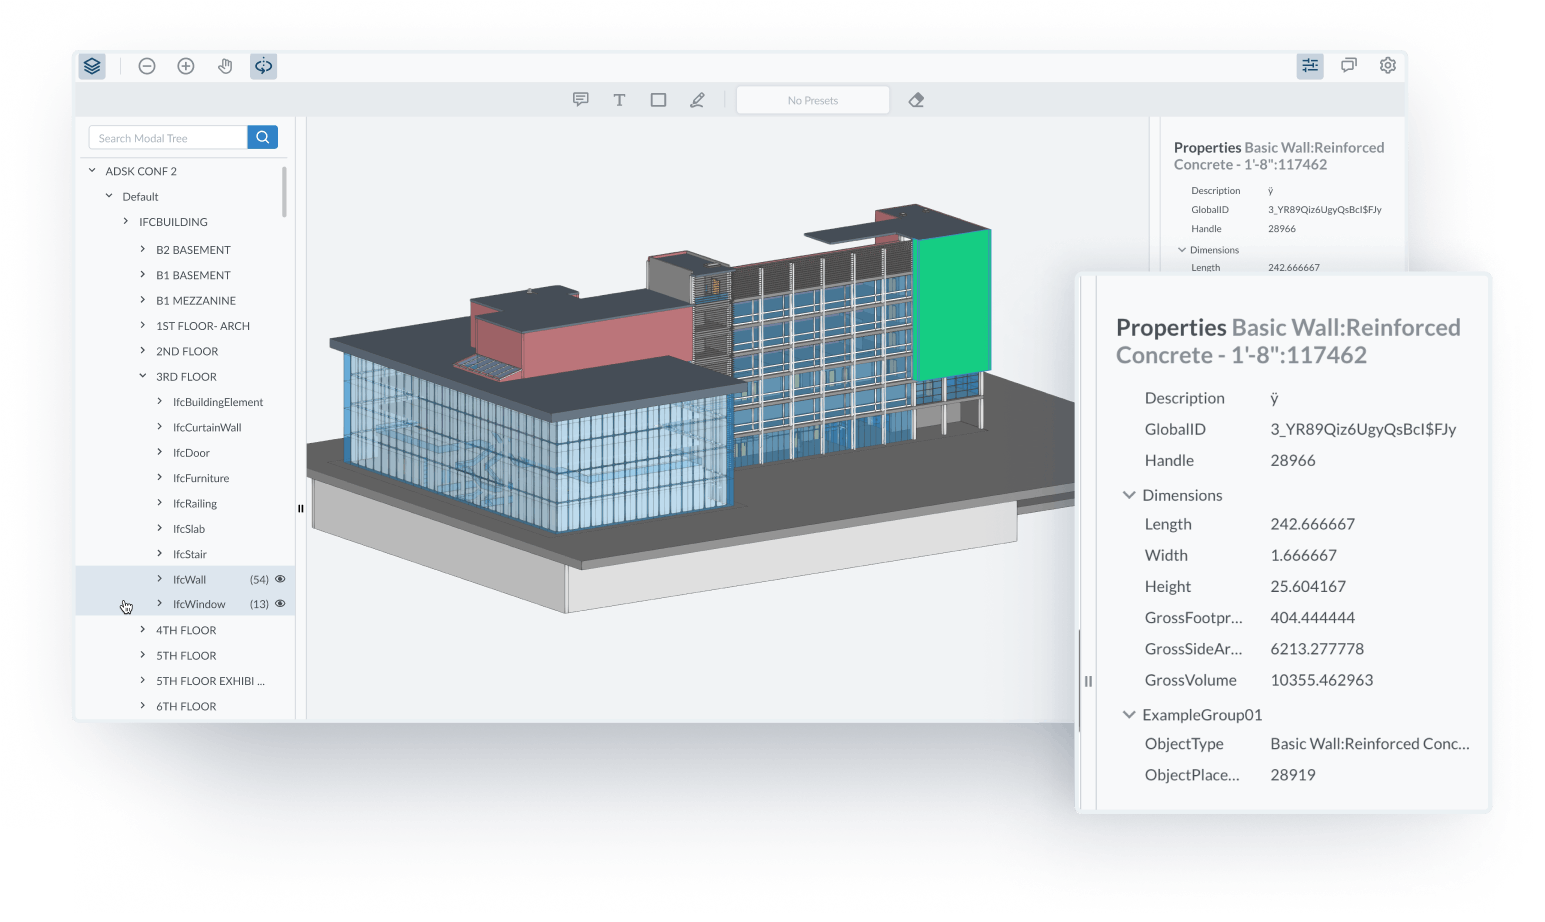 Building information displayed in an object properties panel